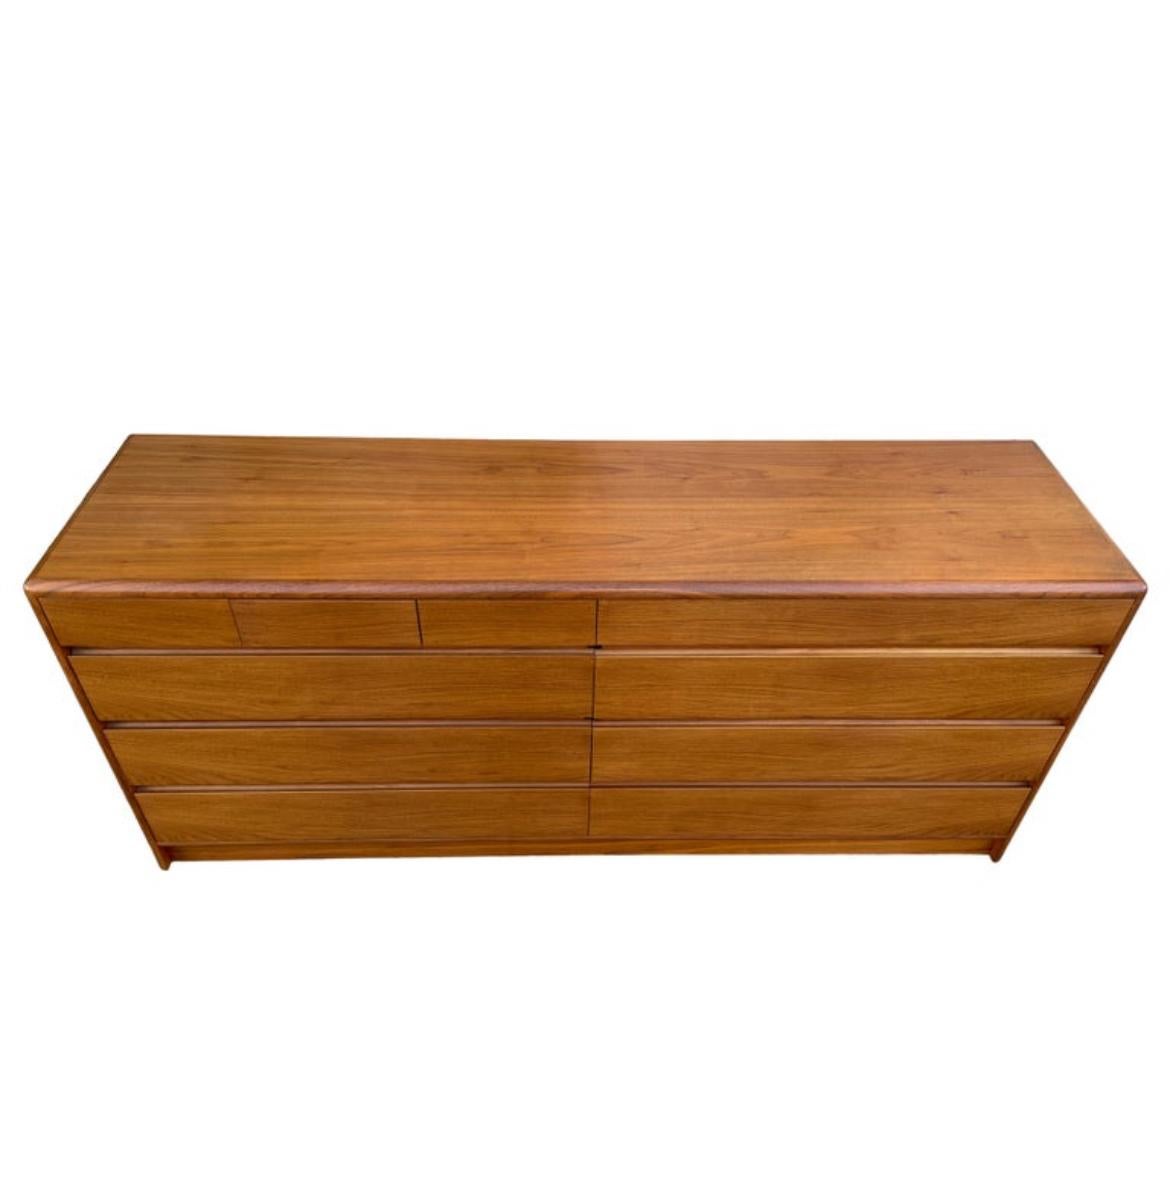 Beautiful mid-century Danish modern teak 10 drawer dresser Credenza by Nordisk Andels-Eksport. Great simple design and great vintage condition - clean inside and out. Drawers slide smooth with dovetail construction. Has 3 small top drawers on left